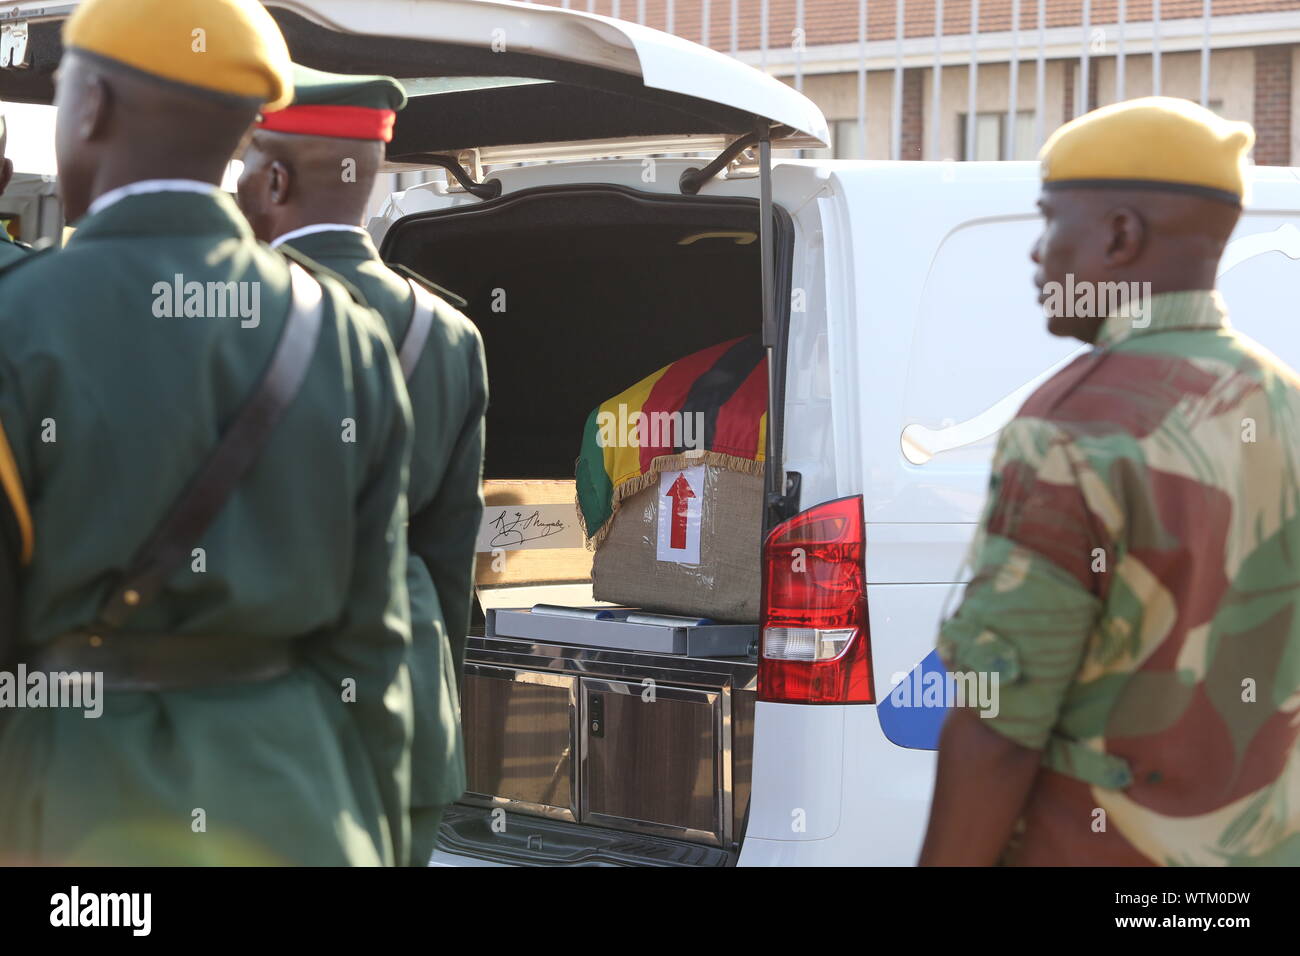 Harare, Zimbabwe. 11th Sep, 2019. The casket of the late former Zimbabwean President Robert Mugabe is seen in a van at the Robert Gabriel Mugabe International Airport in Harare, Zimbabwe, on Sept. 11, 2019. The body of the late former Zimbabwean President Robert Mugabe, who died in Singapore last Friday aged 95, arrived in the country on Wednesday afternoon ahead of his burial planned for Sunday. Credit: Chen Yaqin/Xinhua/Alamy Live News Stock Photo